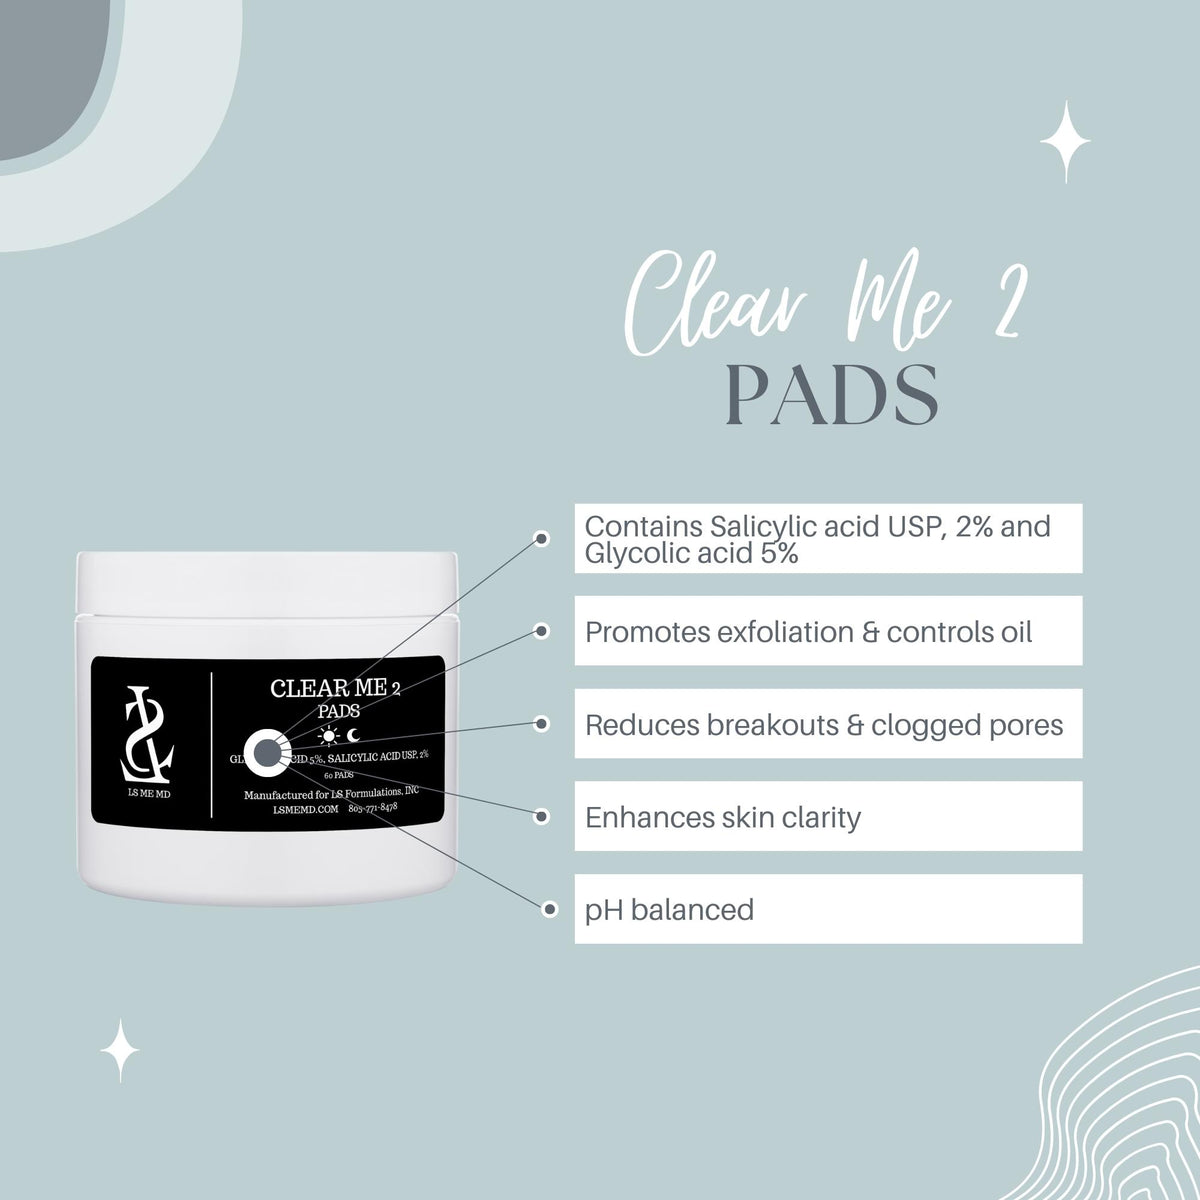 CLEAR ME 2: PADS